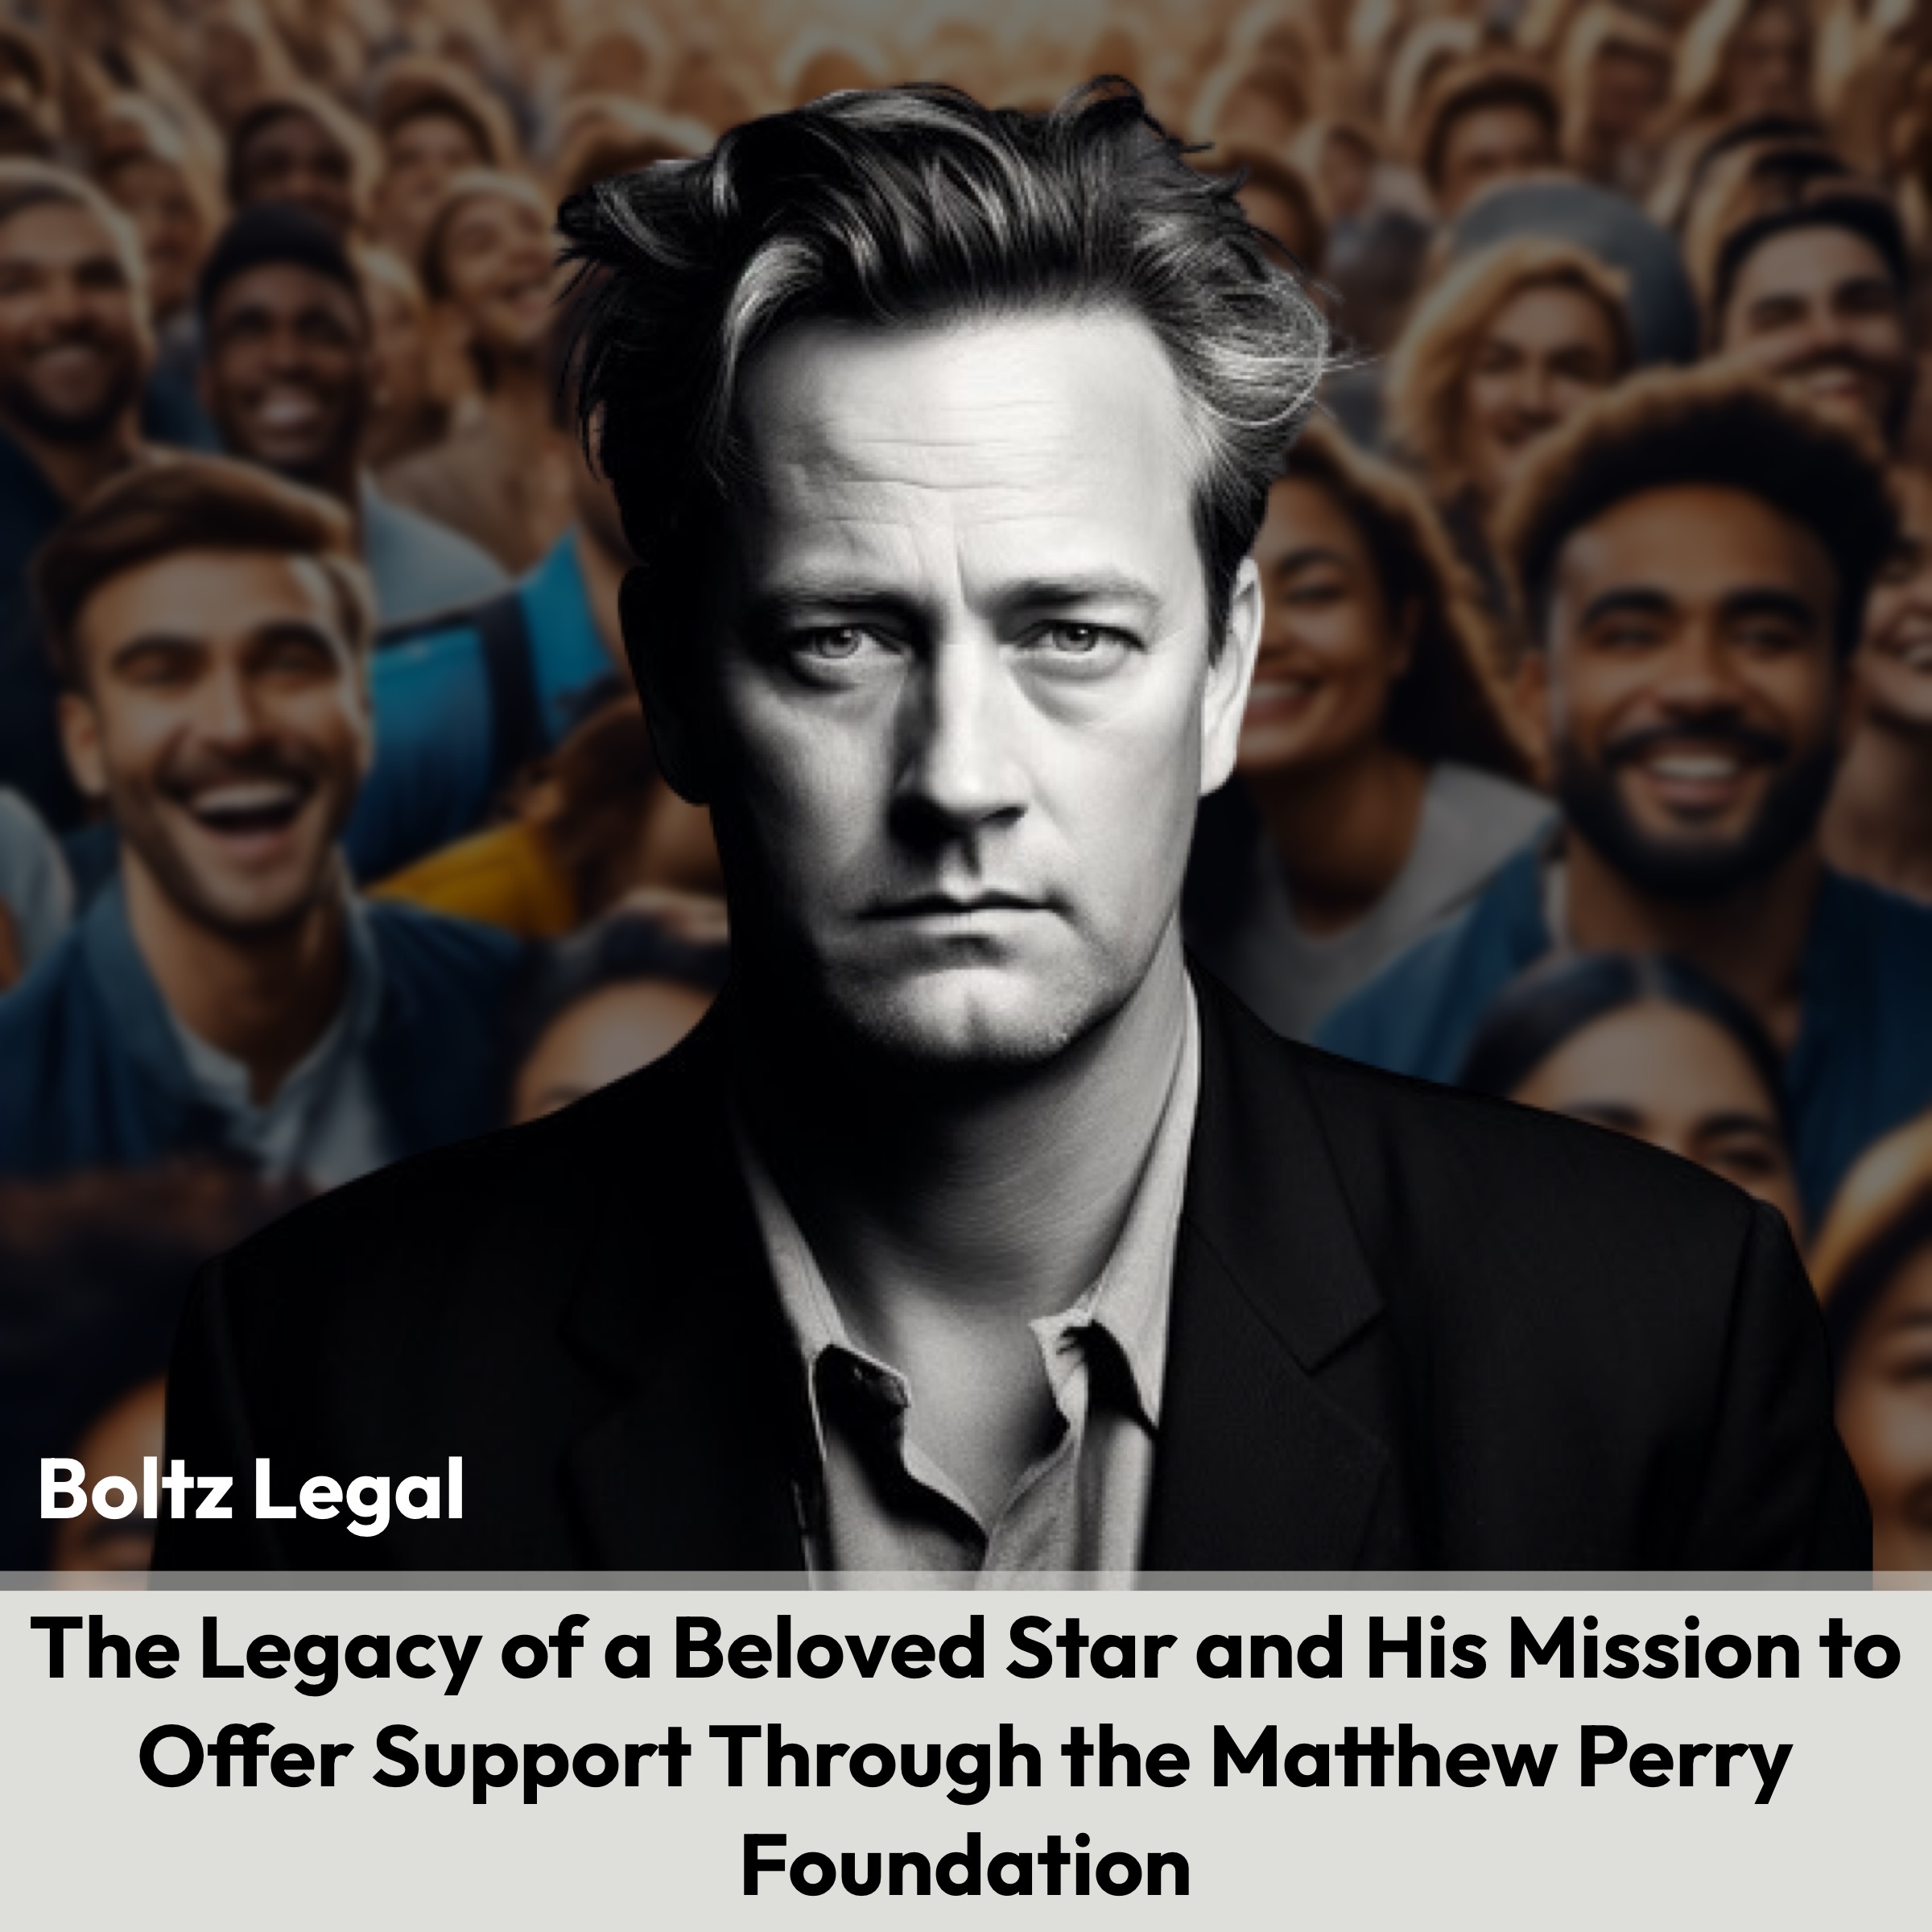 The Legacy of a Beloved Star and His Mission to Offer Support Through the Matthew Perry Foundation